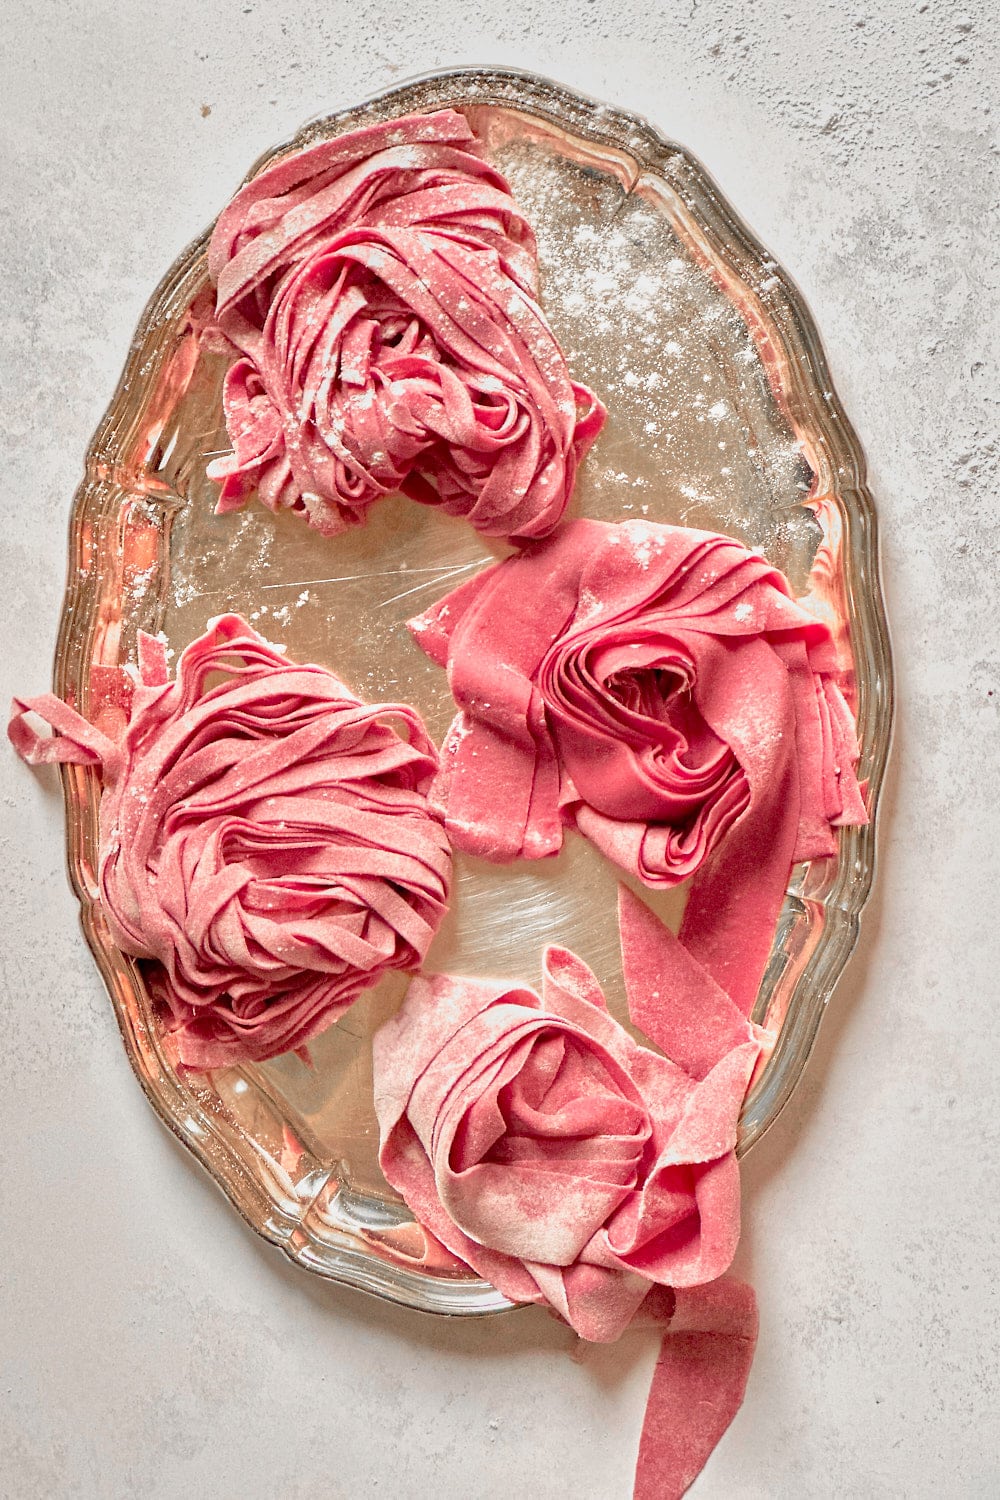 Homemade pink beet pasta nests on a silver tray on a light grey backdrop.